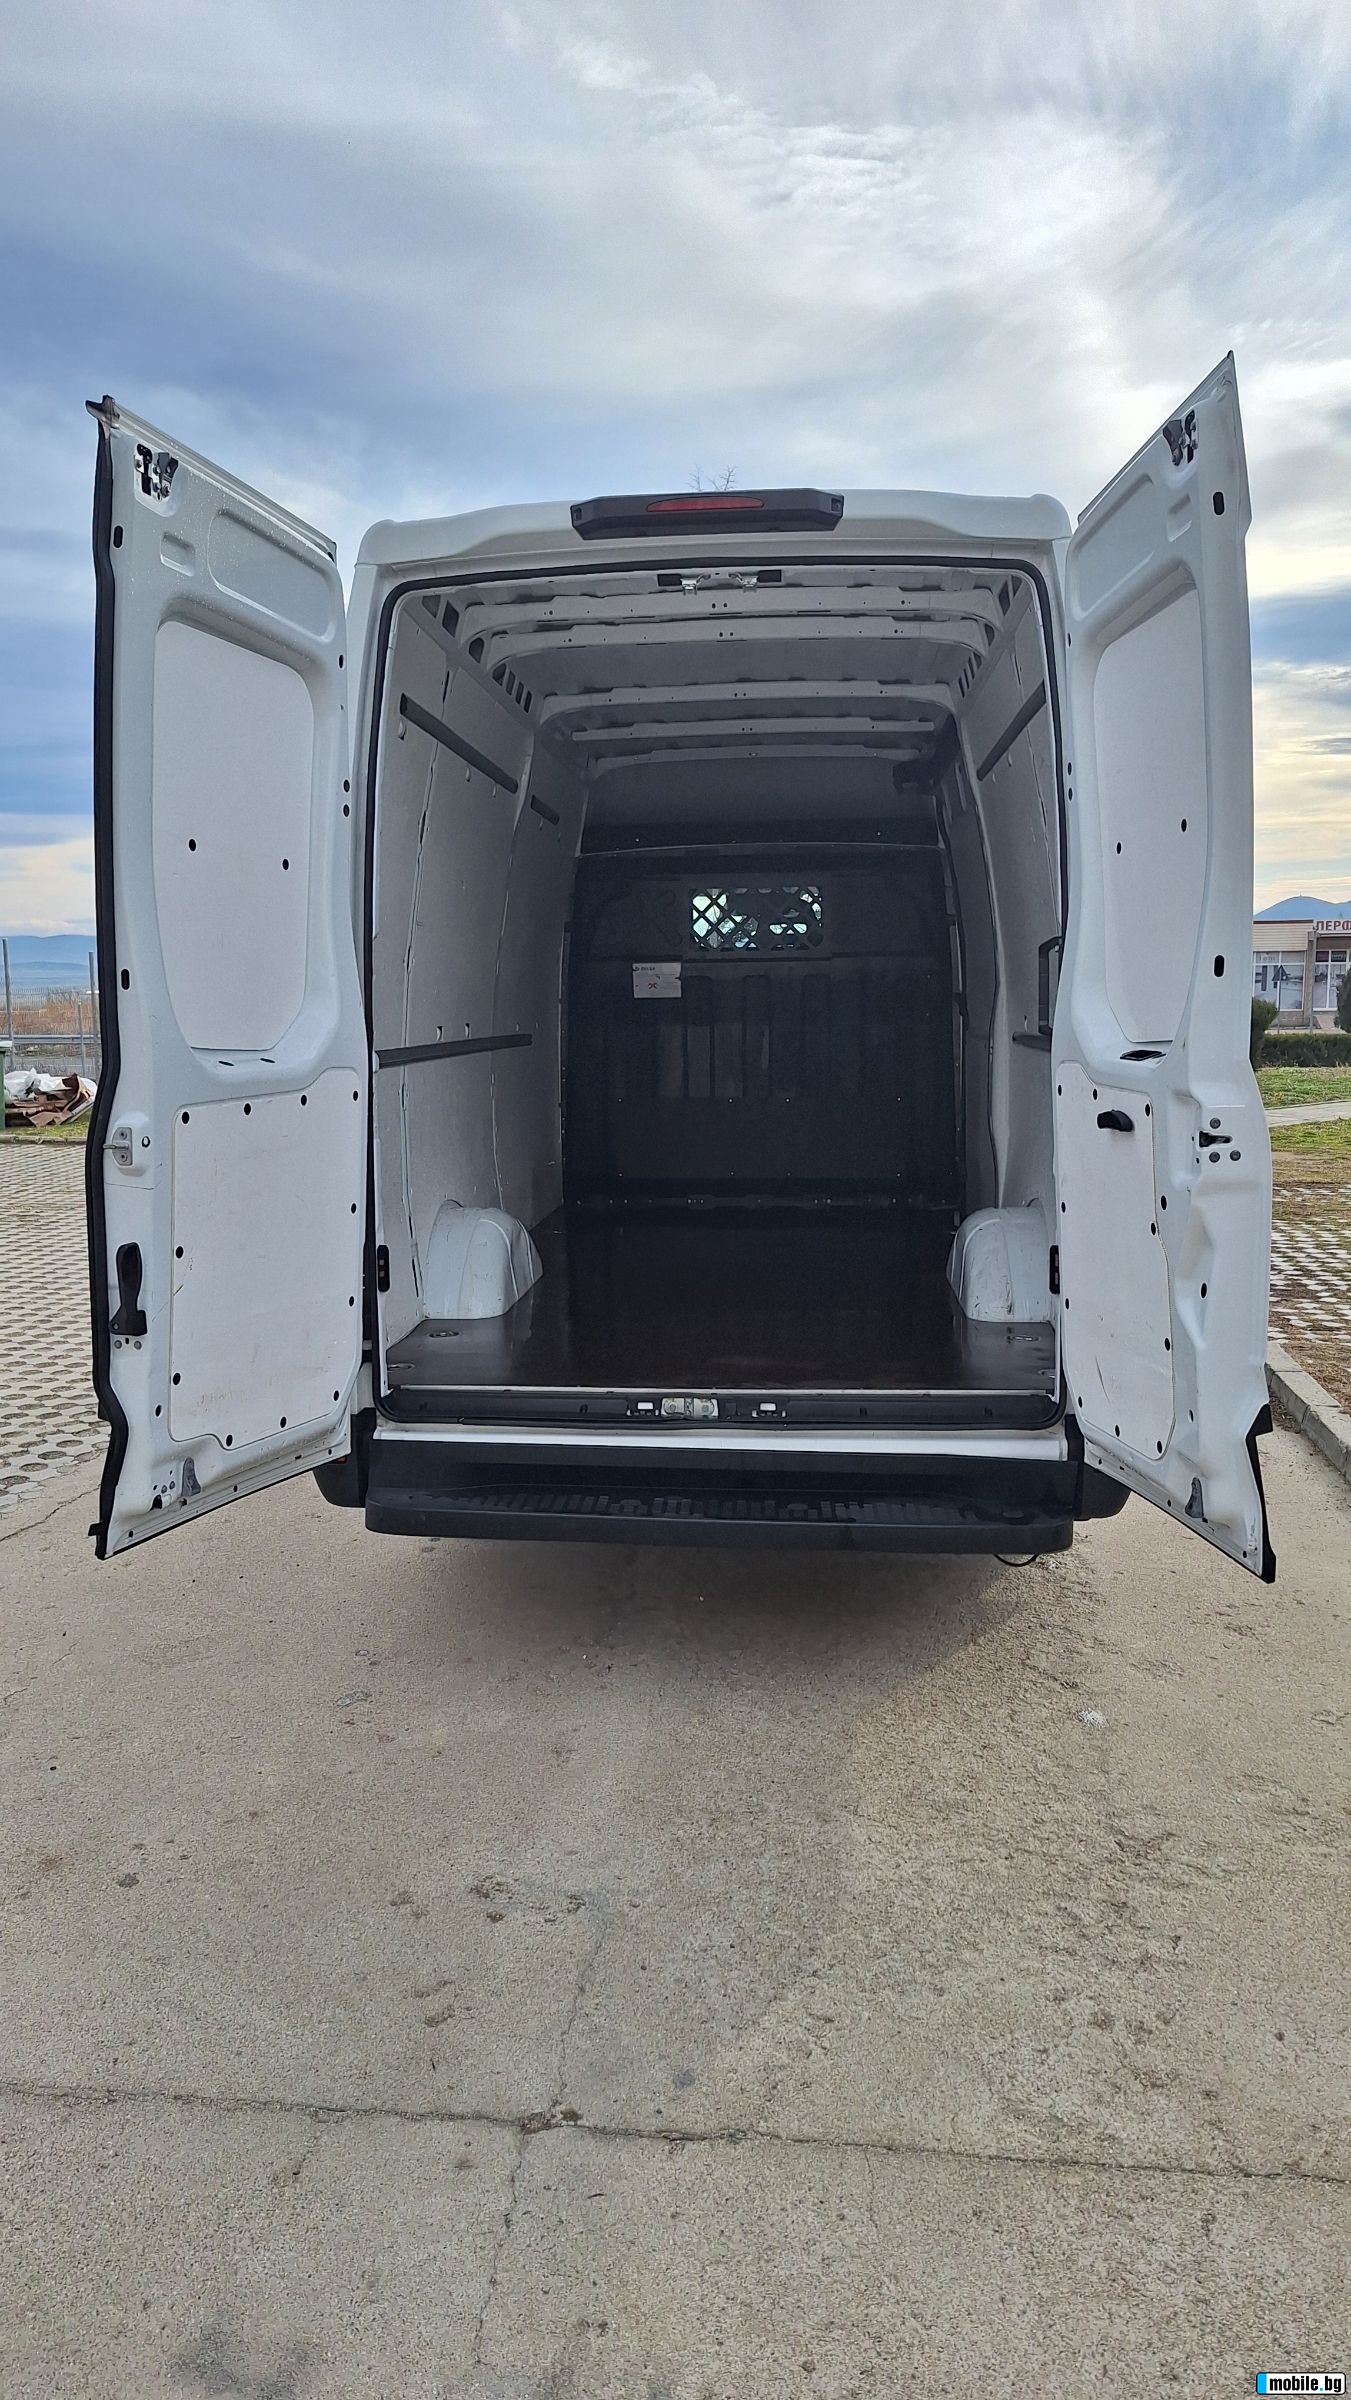 Iveco Daily 35s16  * 70600*    | Mobile.bg   8